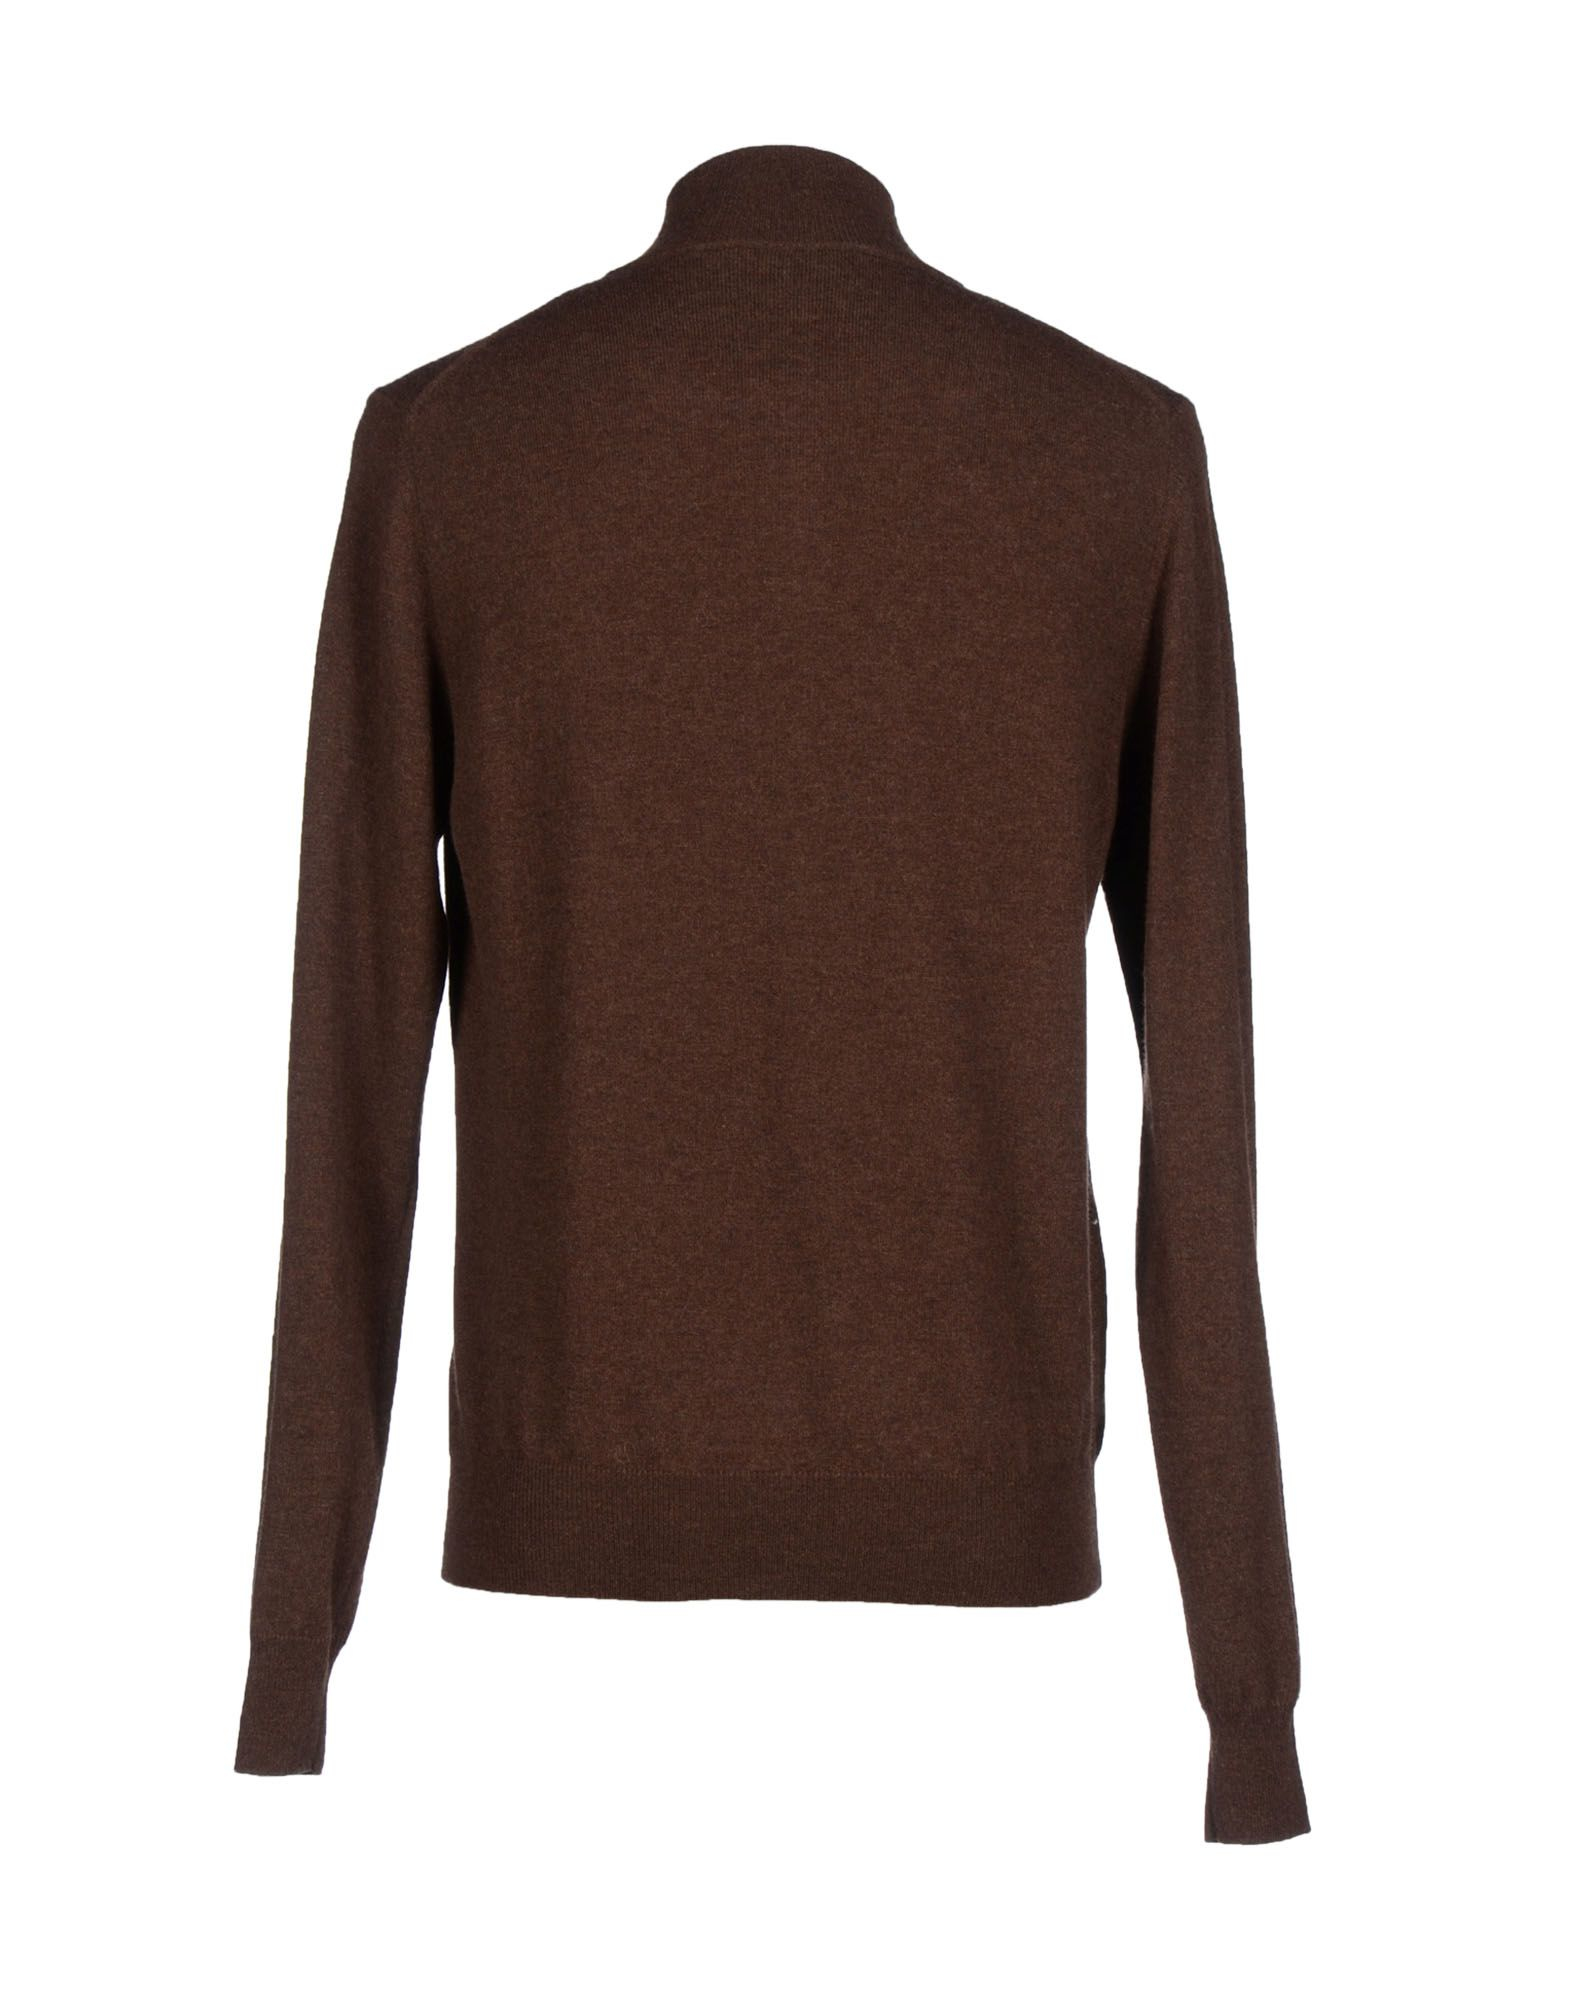 Lyst - Fred Perry Turtleneck in Brown for Men